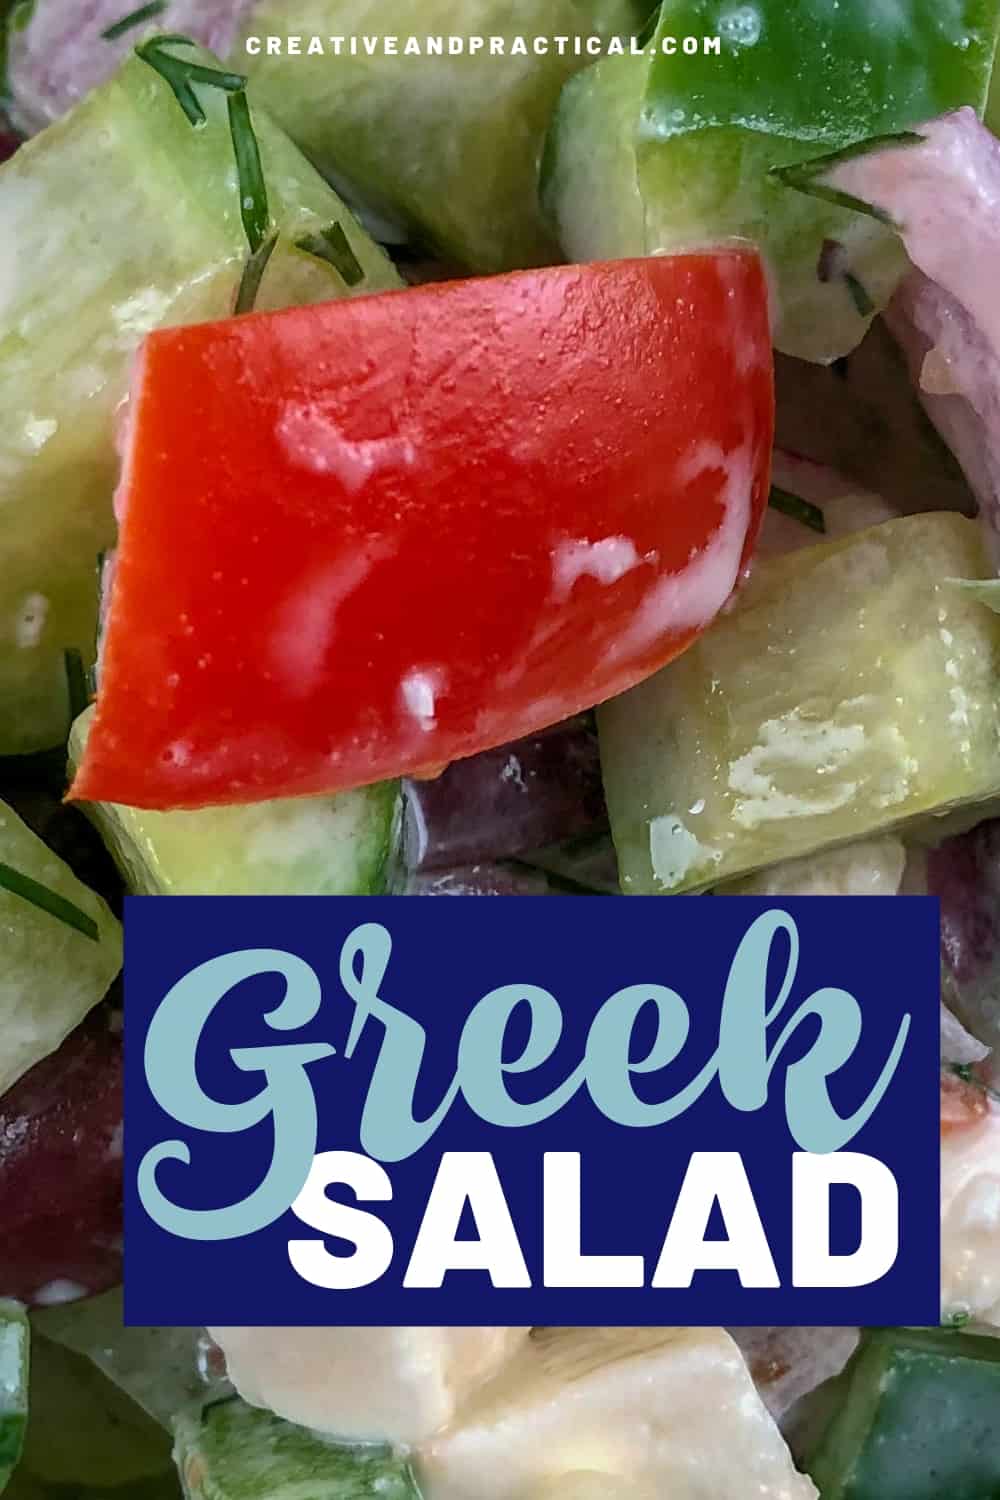 This traditional, creamy, chopped Greek Salad is simply delicious and a great option for lunch. #cheerfulcook #salad #greeksalad #recipe  #lunch #cucumber #salad #chopped #easy ♡ cheerfulcook.com via @cheerfulcook